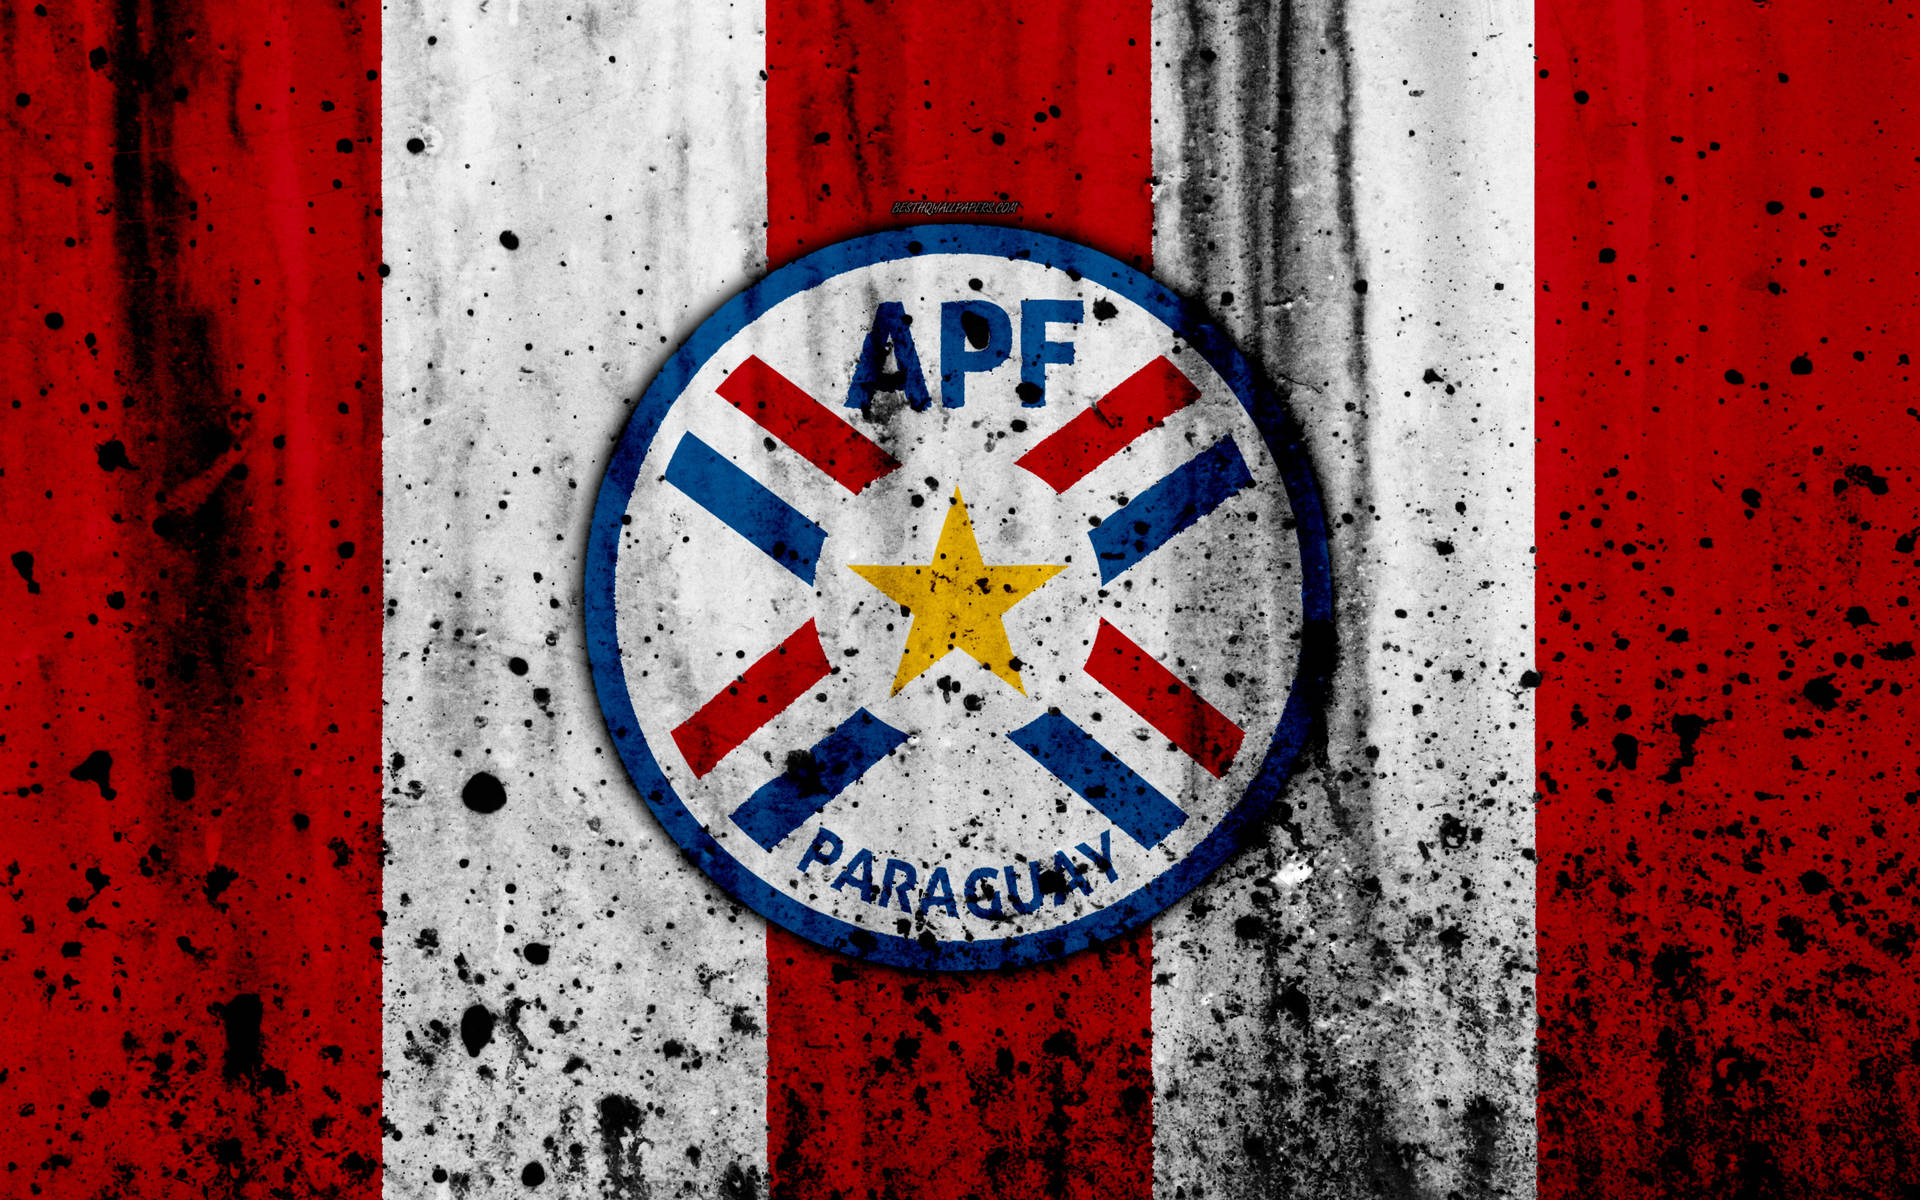 Paraguay Apf Patch Wallpaper